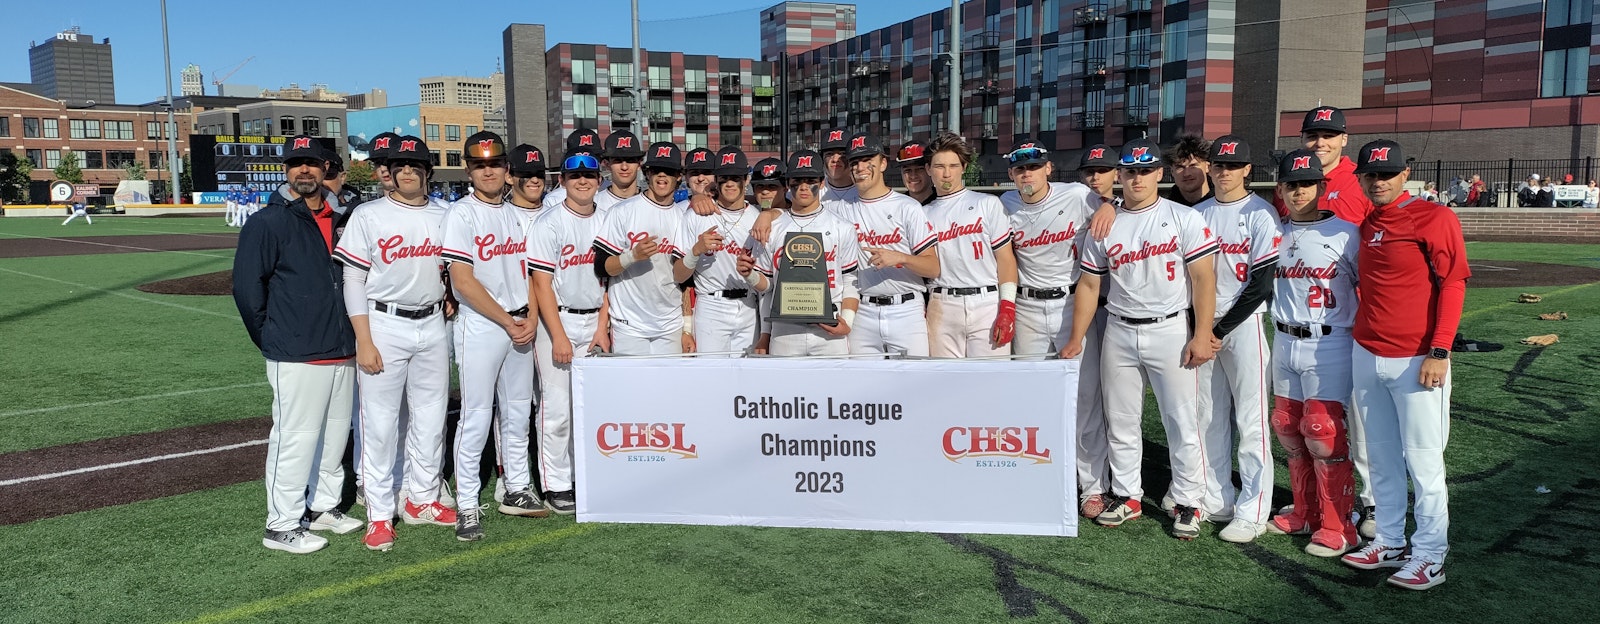 Cardinal Mooney won its first Catholic League championship and is seeking a return to MHSAA finals, where they were a Division 4 runner-up in 2021. ”We’re on a mission,” said coach Mike Rice.